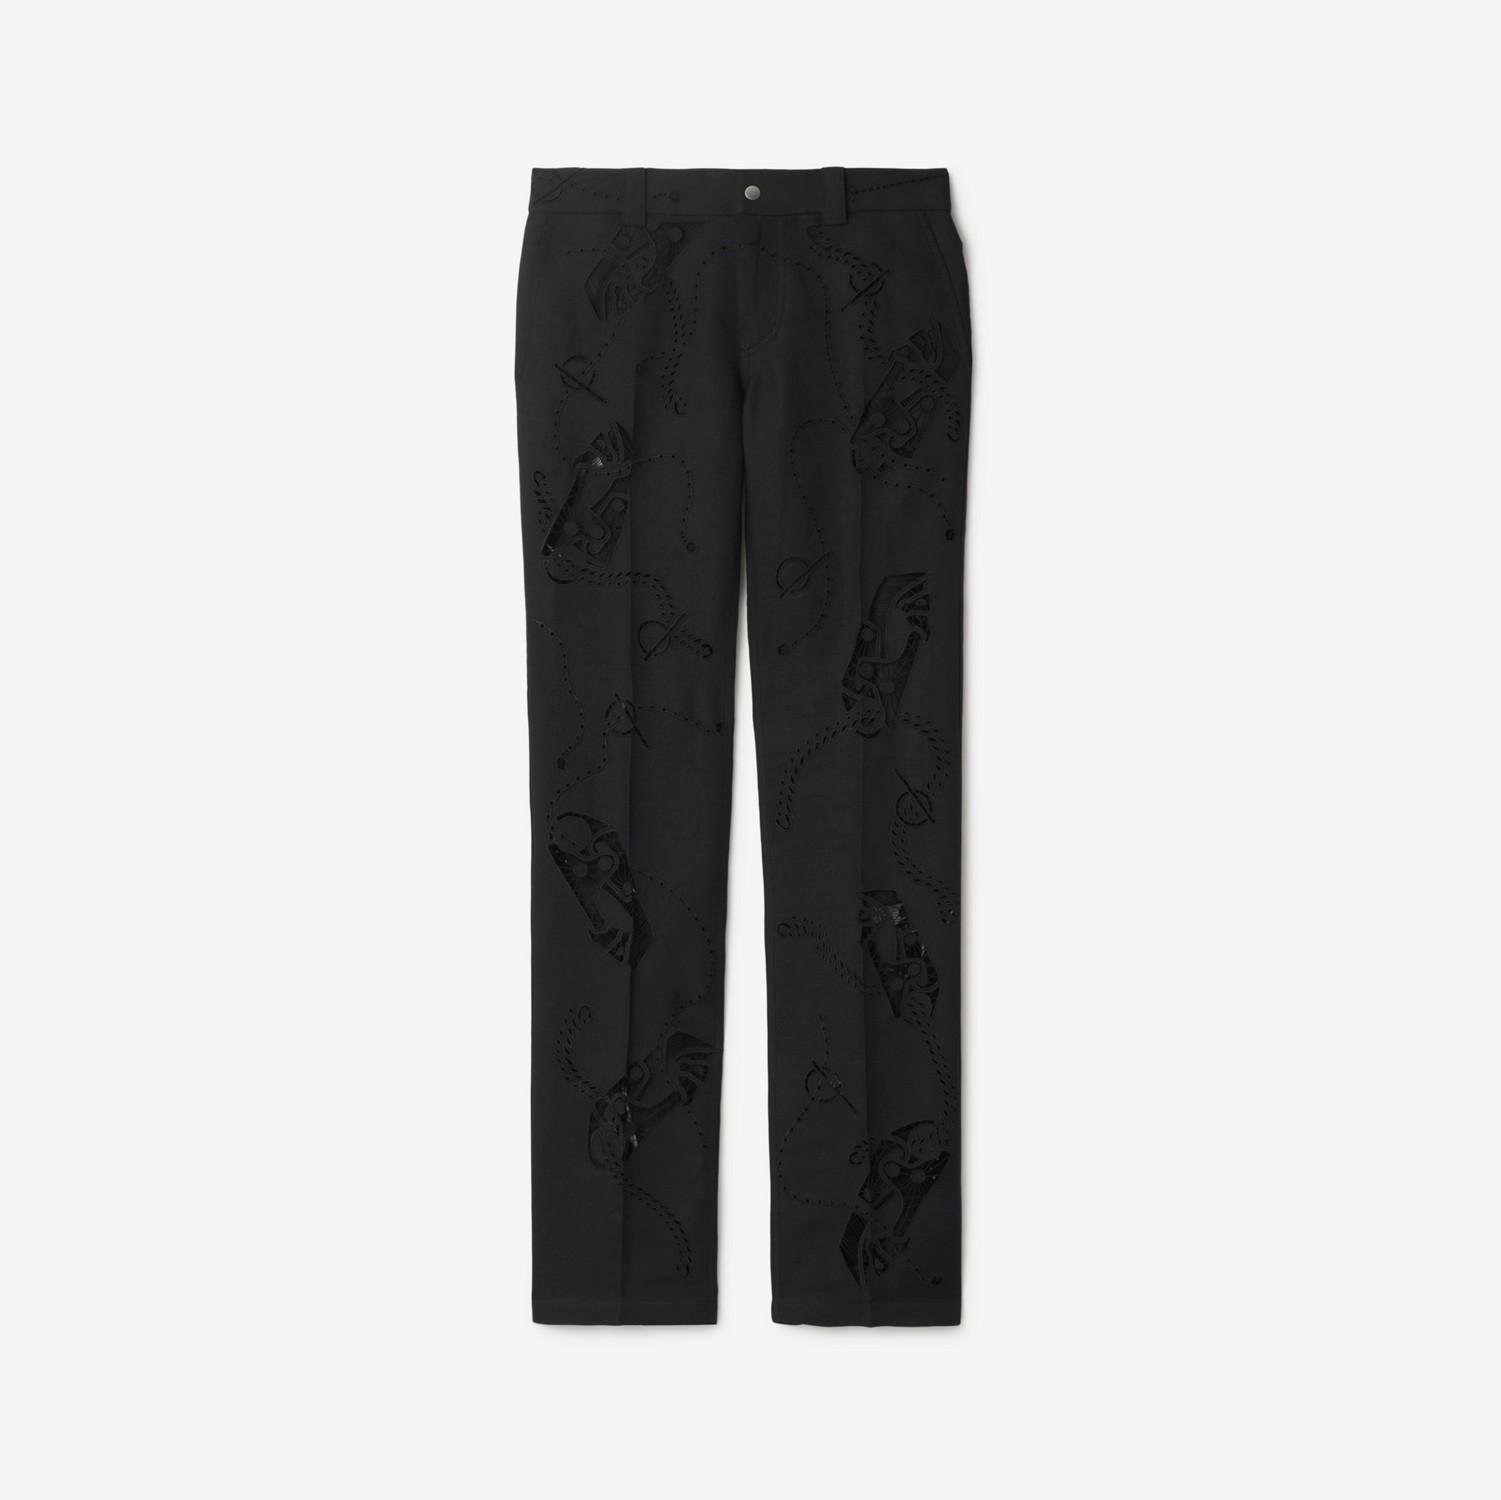 Broderie Anglaise Canvas Trousers by BURBERRY